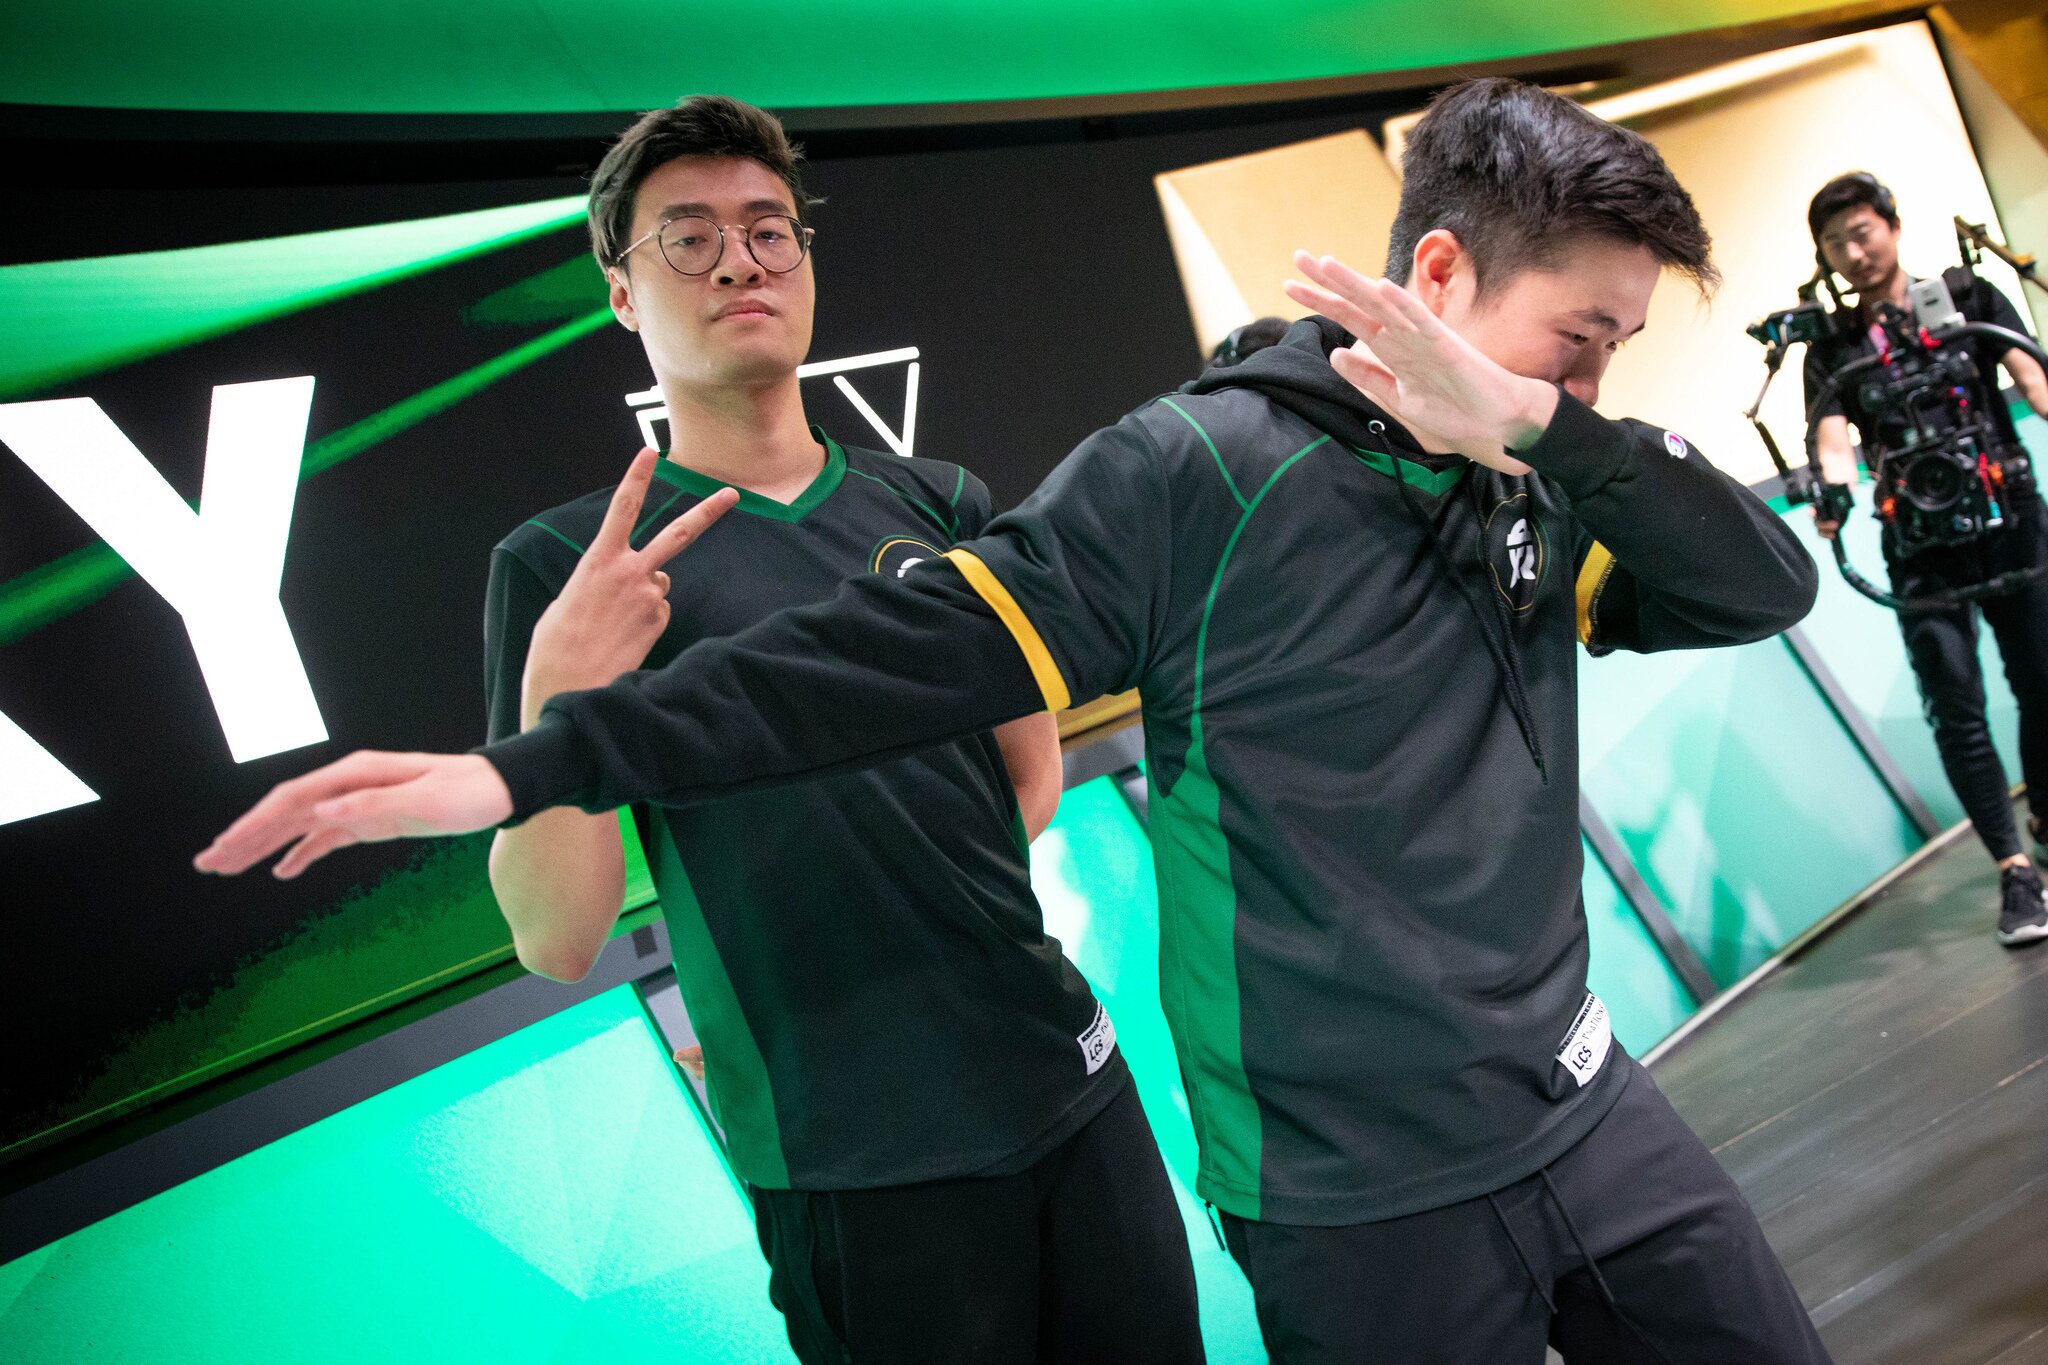 After squeaking out a win in the quarterfinals, FlyQuest will face Team Liquid in the semifinals (Photo courtesy of Riot Games)